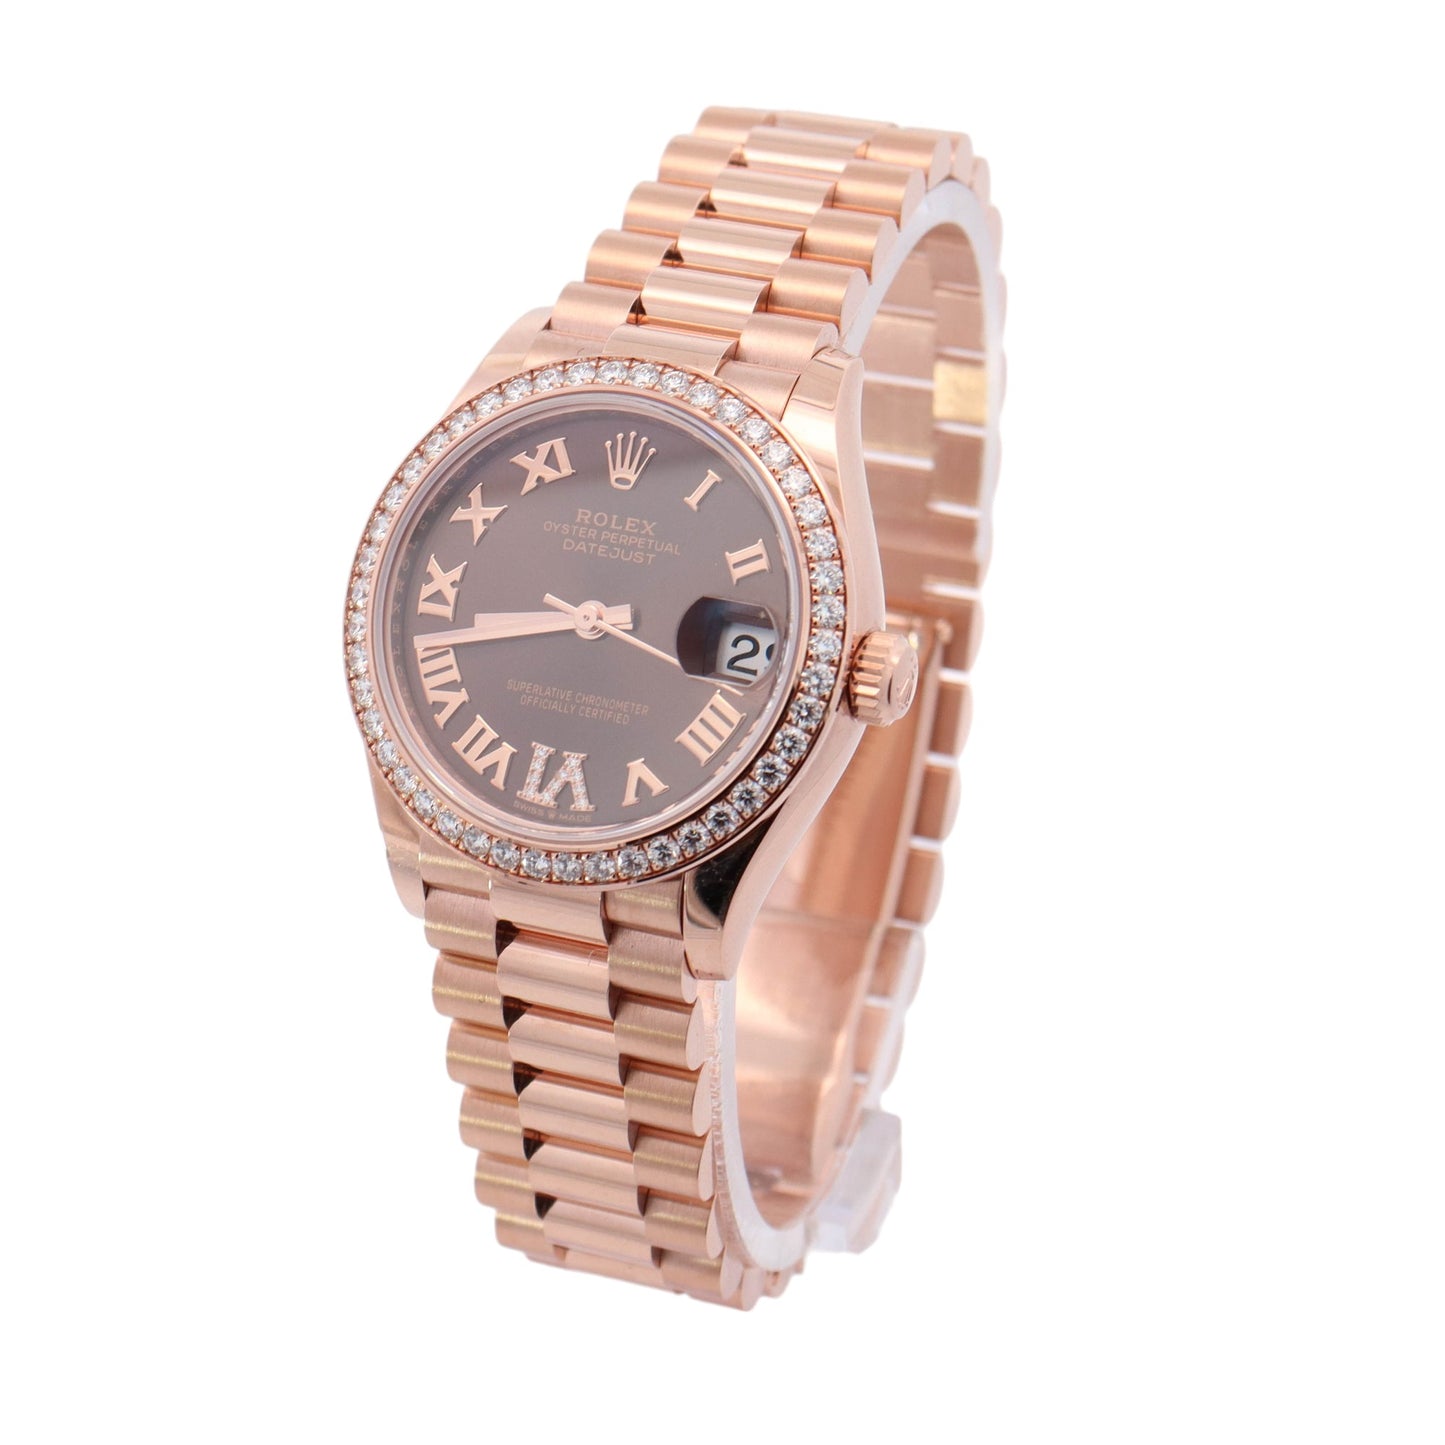 Rolex Datejust Rose Gold 31mm Chocolate Roman Dial Watch Reference #: 278285RBR - Happy Jewelers Fine Jewelry Lifetime Warranty